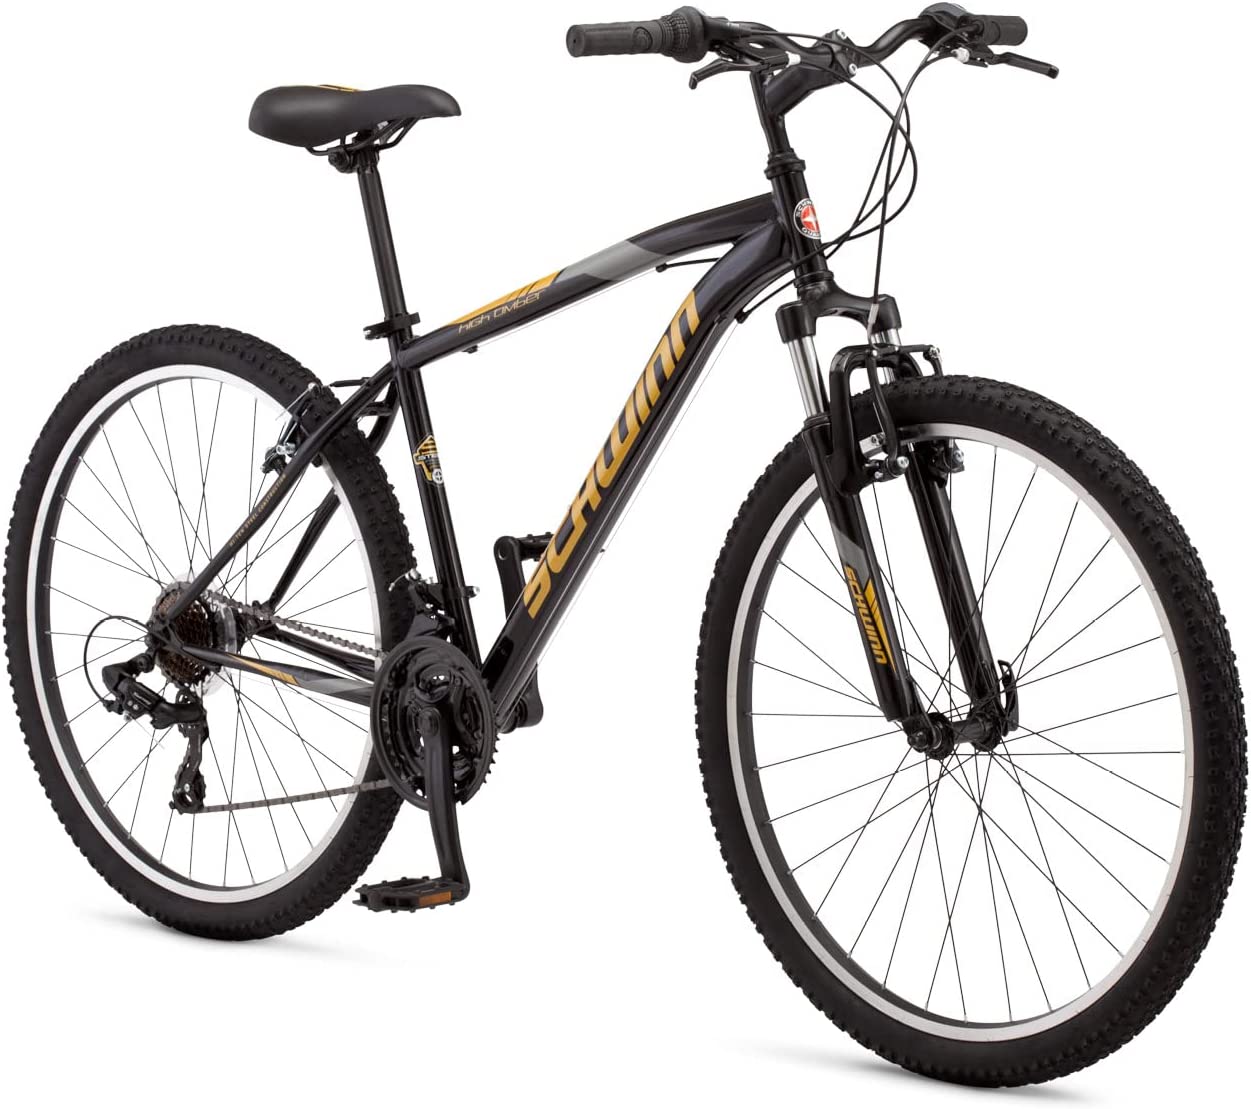 Which Bike is Best for Daily 100 km Running?